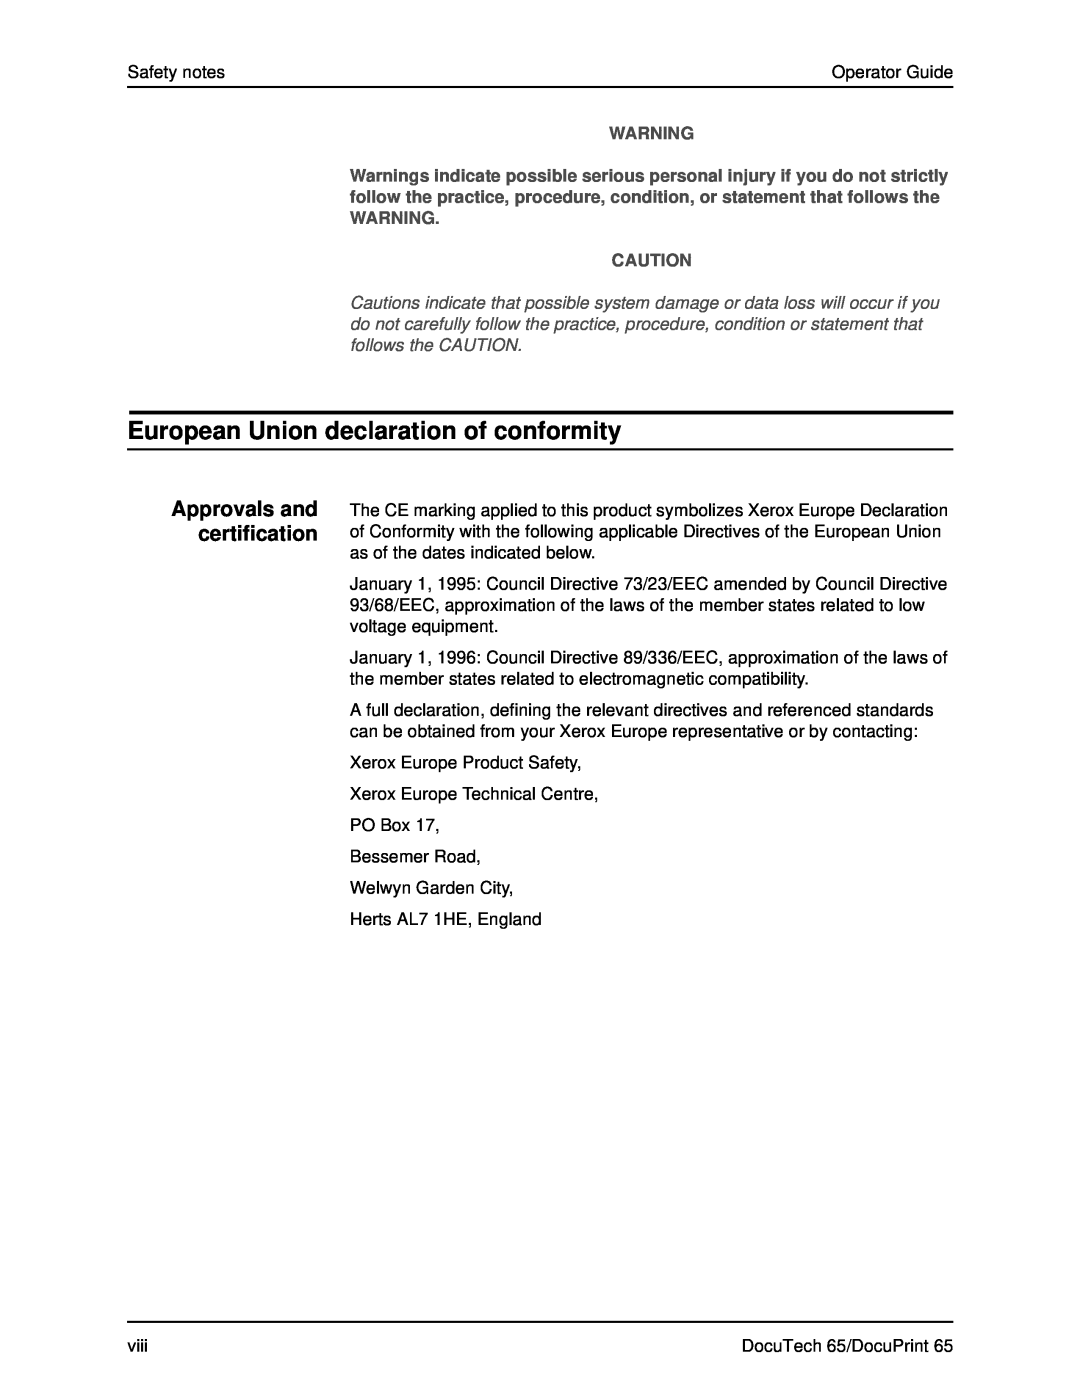 Xerox DOCUTECH 65 manual European Union declaration of conformity, Approvals and certification 